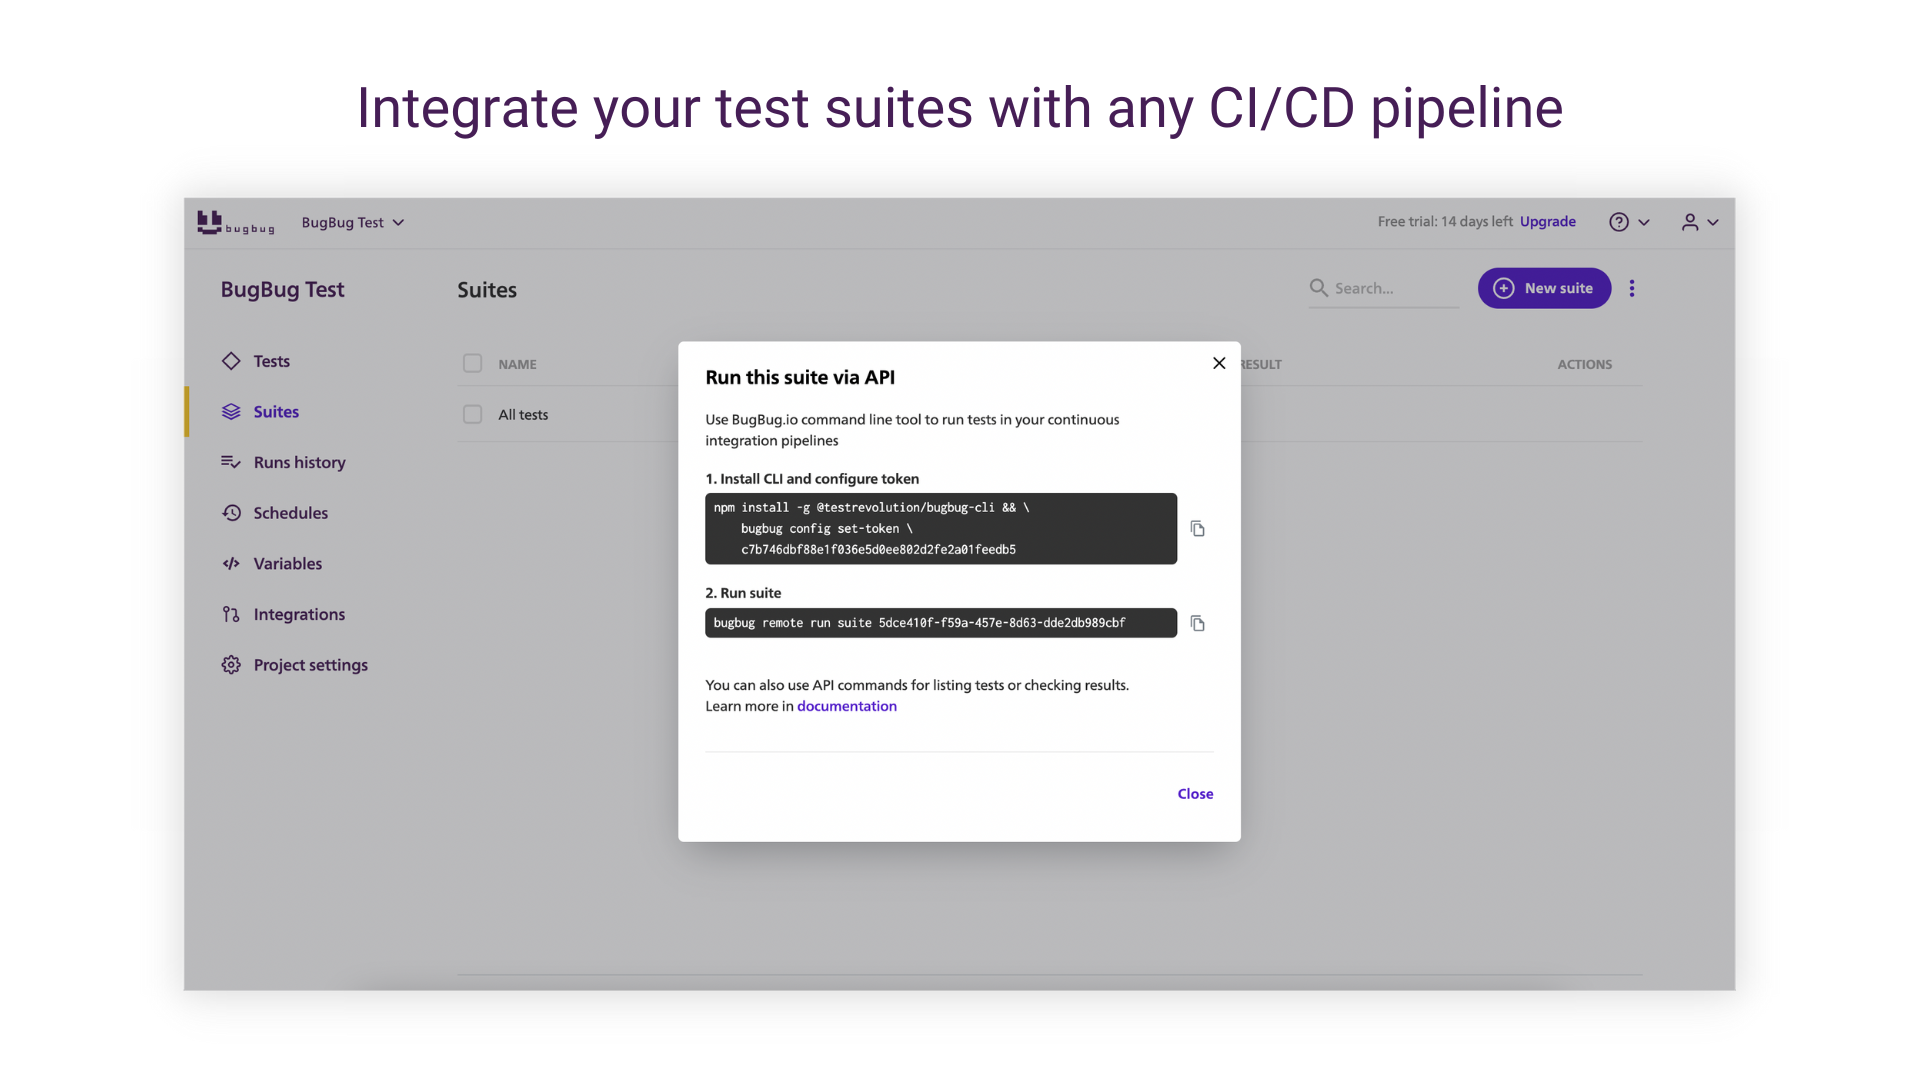 Integrate your test suites with any CI/CD pipeline